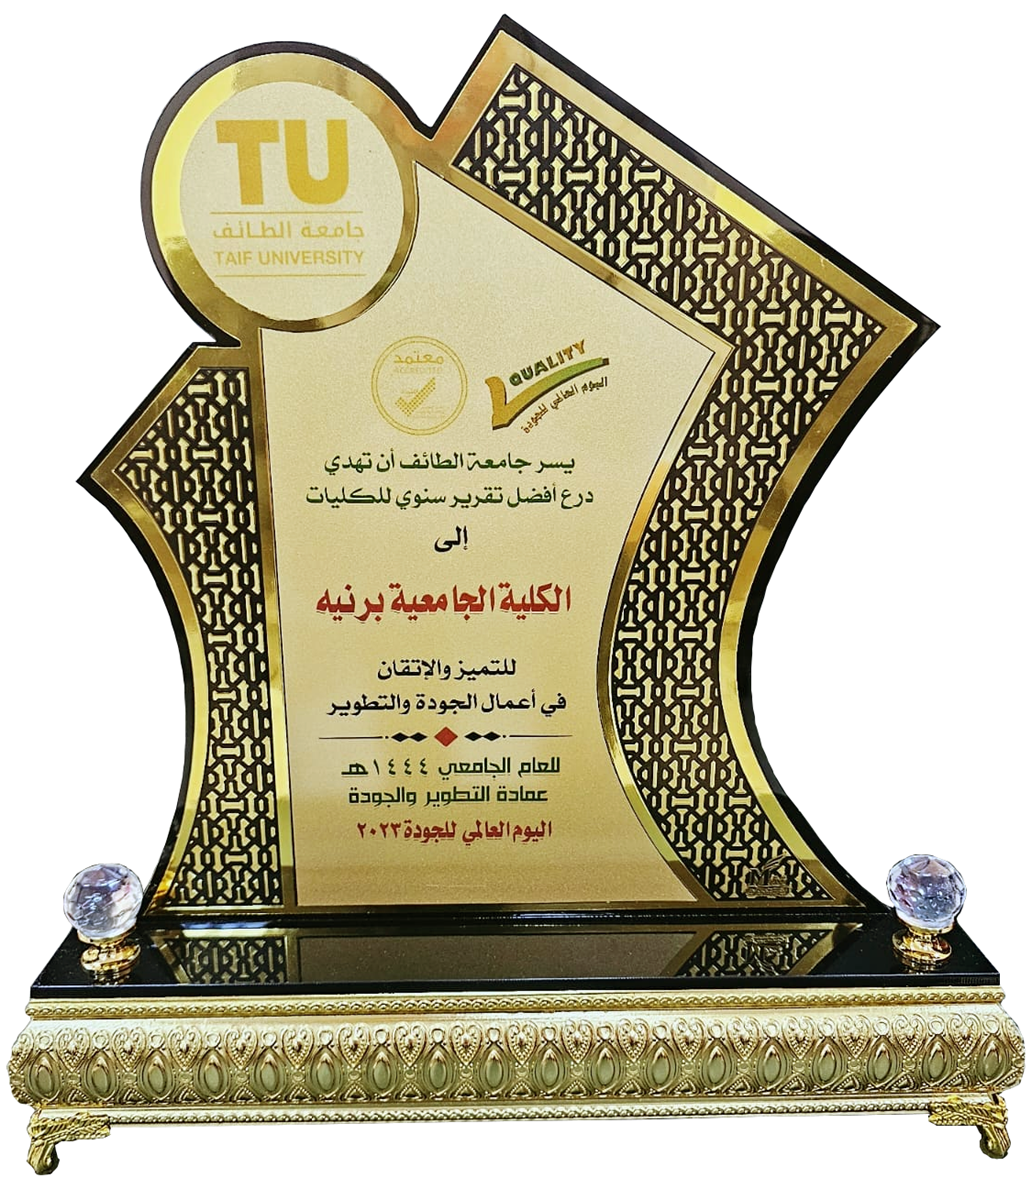 The university president honors the Ranyah University College in the International Day of Quality